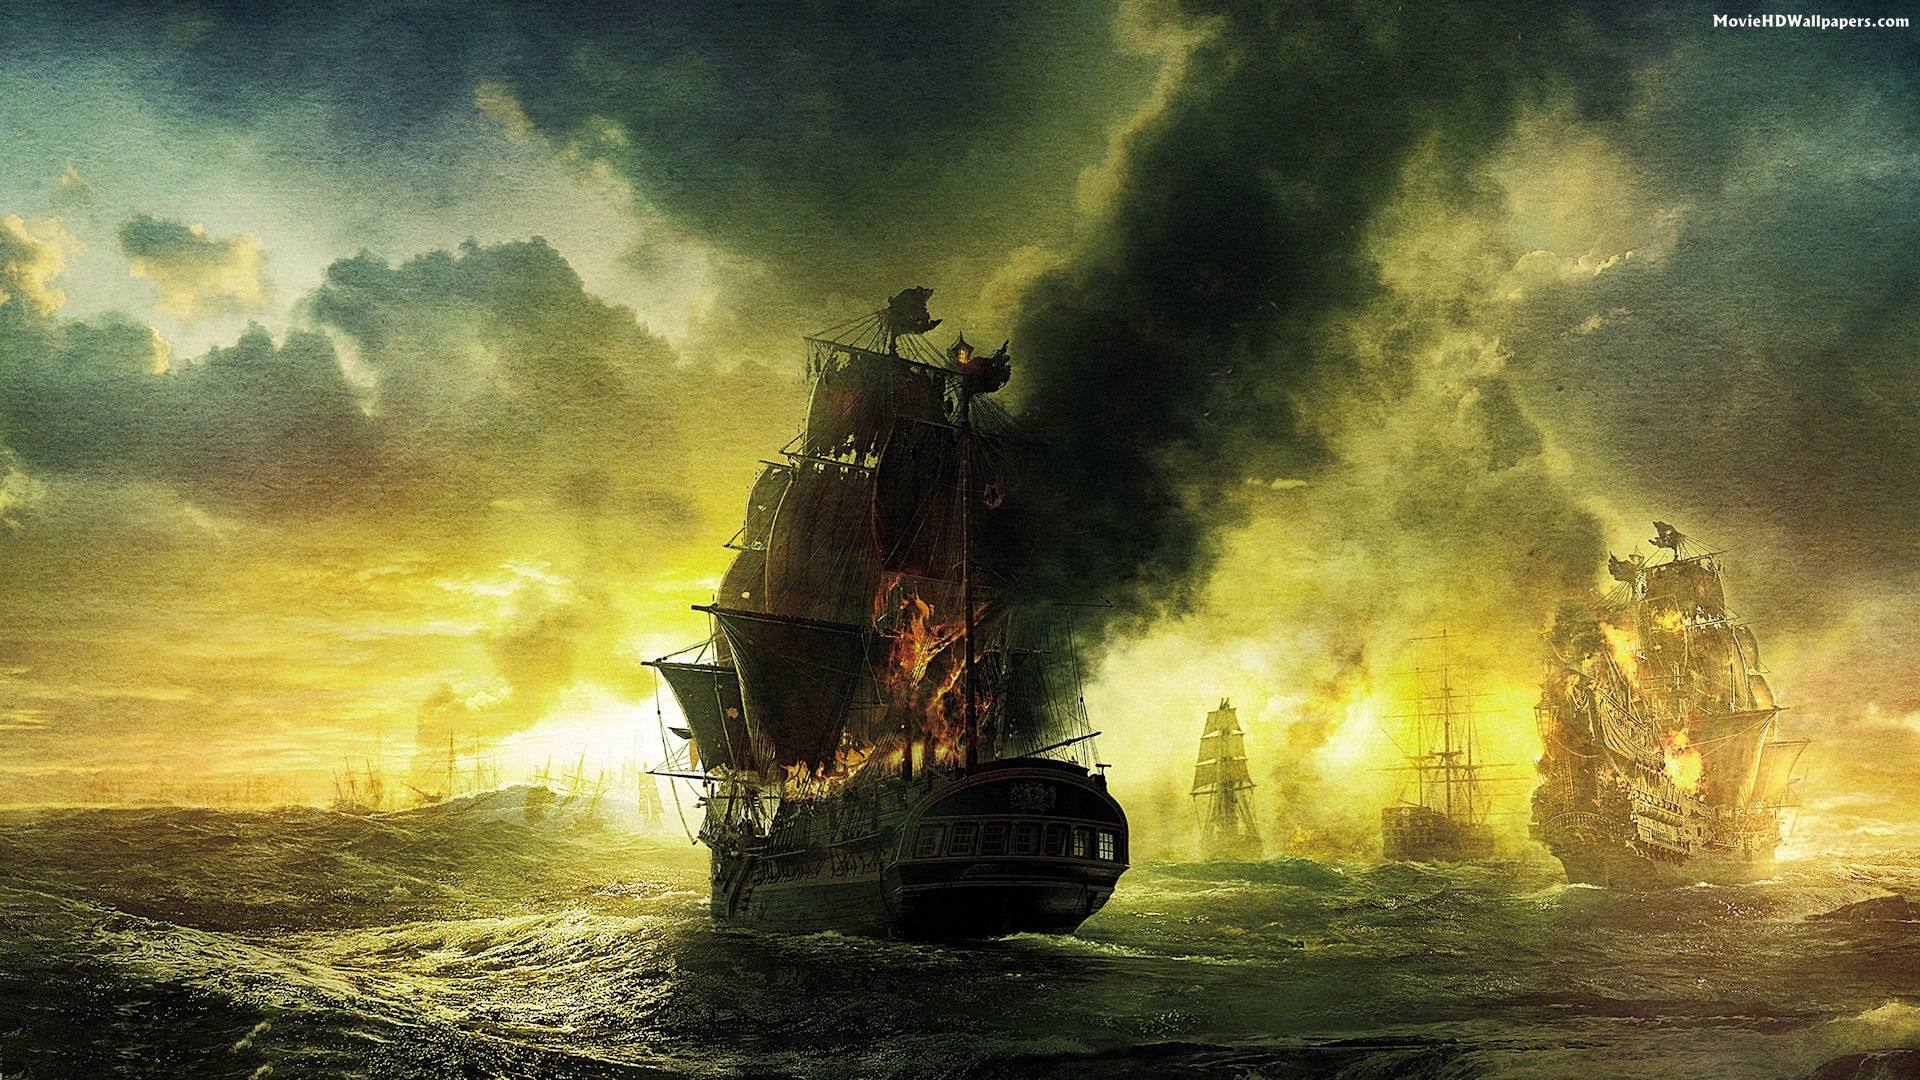 Pirates of the Caribbean On Stranger Tides Ship | Movie HD Wallpapers